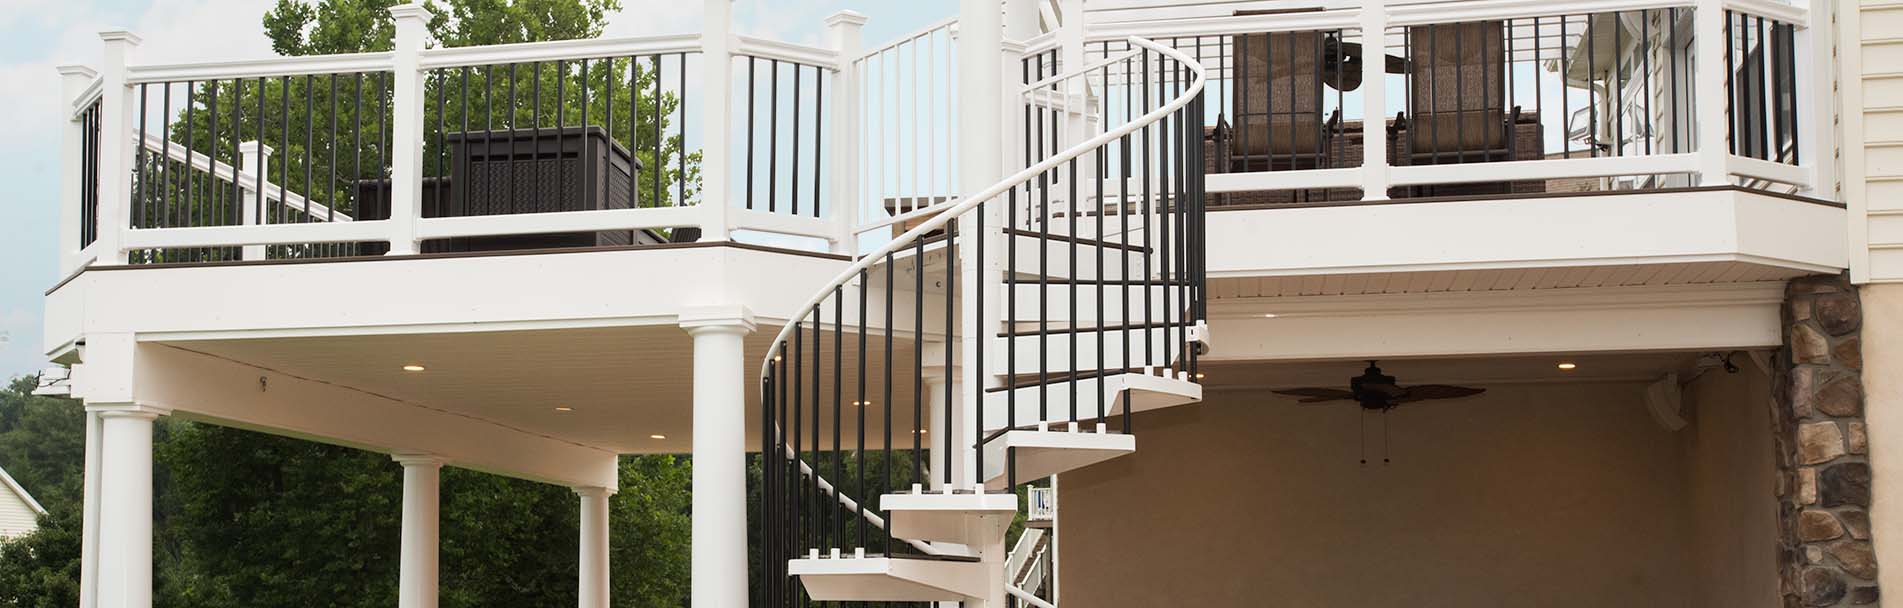 Top 5 Outdoor Design Trends Perfect for a Spiral Staircase